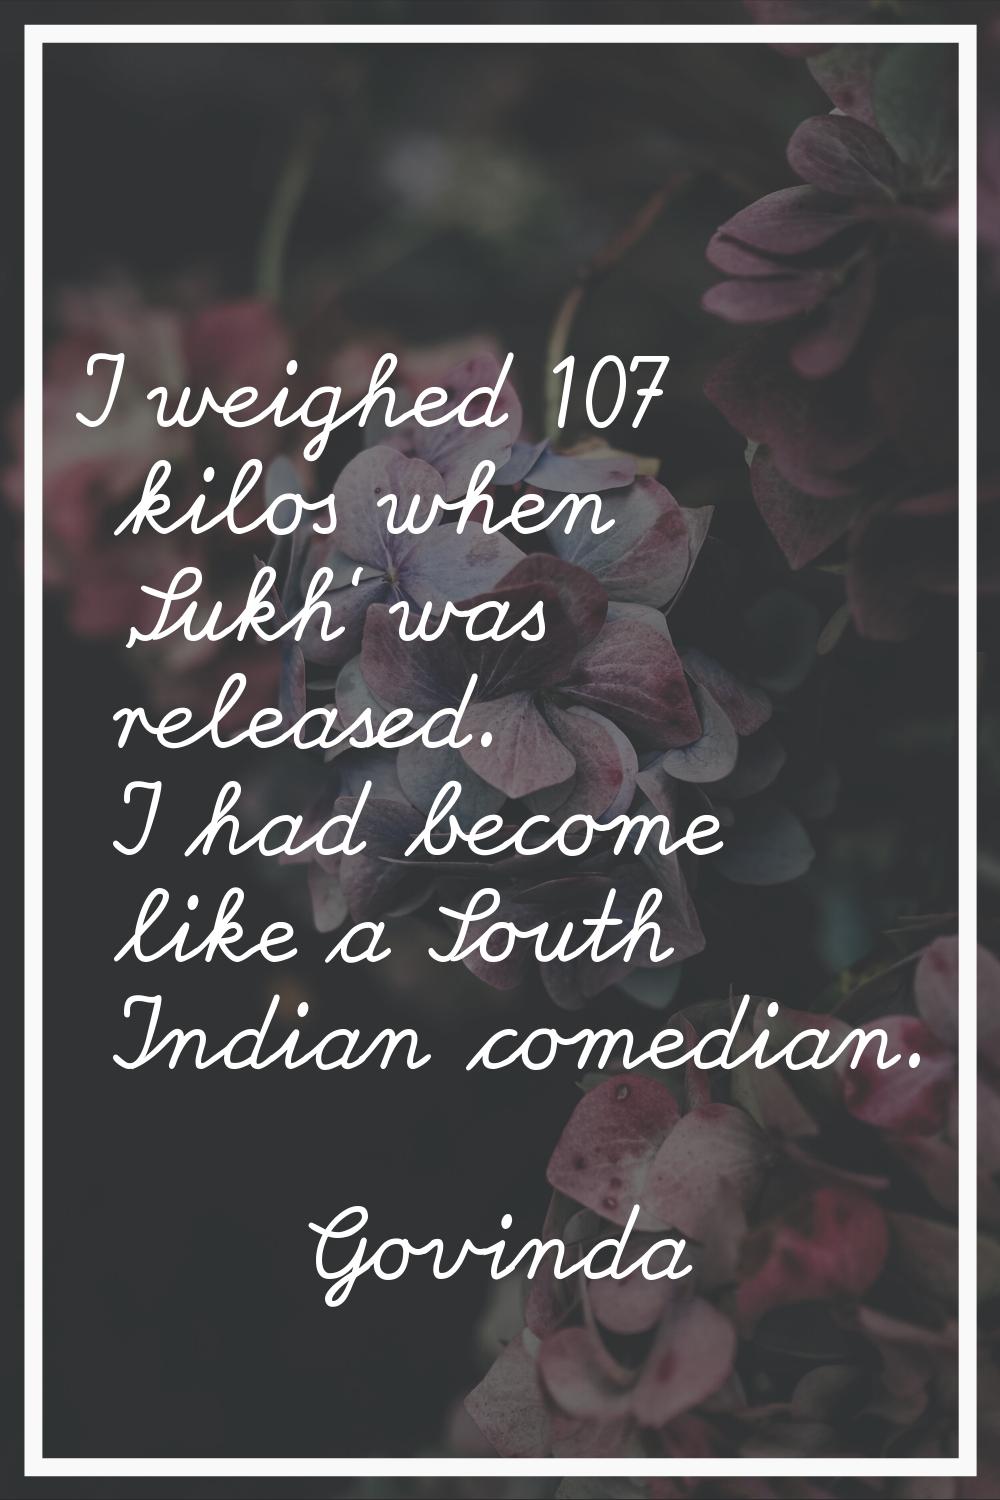 I weighed 107 kilos when 'Sukh' was released. I had become like a South Indian comedian.